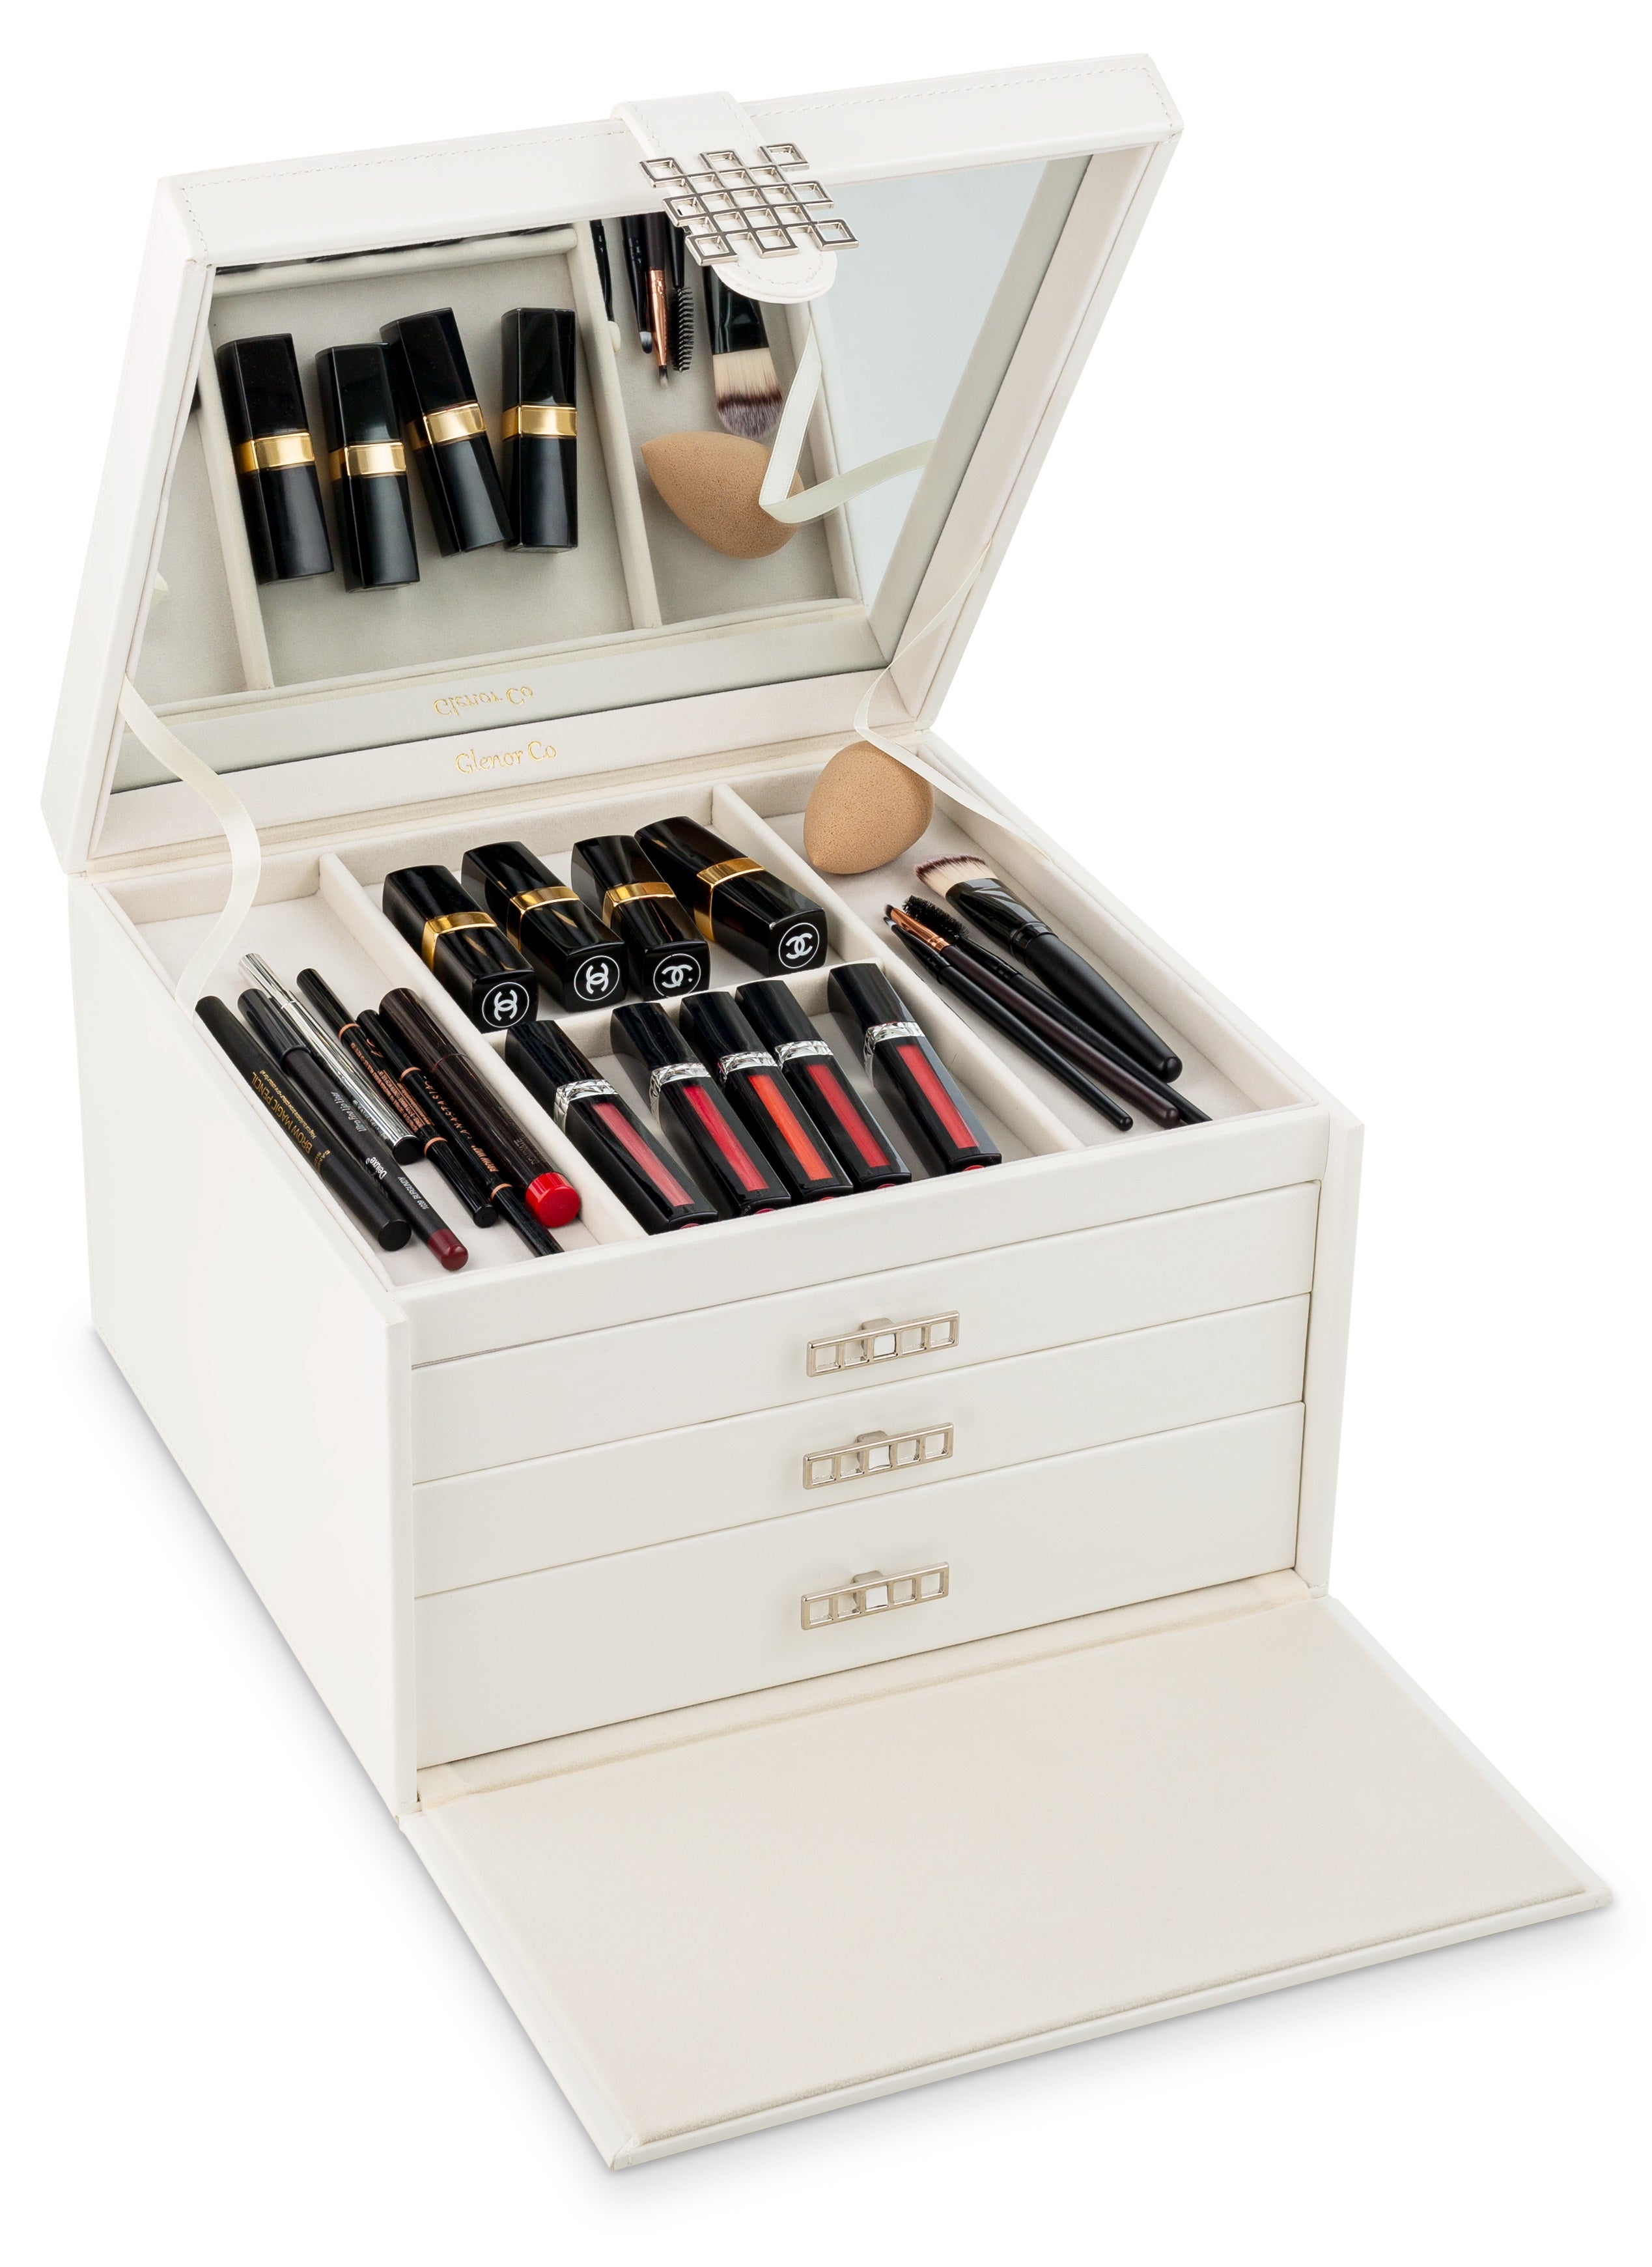 Glenor Co Makeup Organizer - Extra Large Exquisite Case W Modern Closure 4 Drawer Trays & Full Mirror - Huge Cosmetic Storage Jewelry Box for